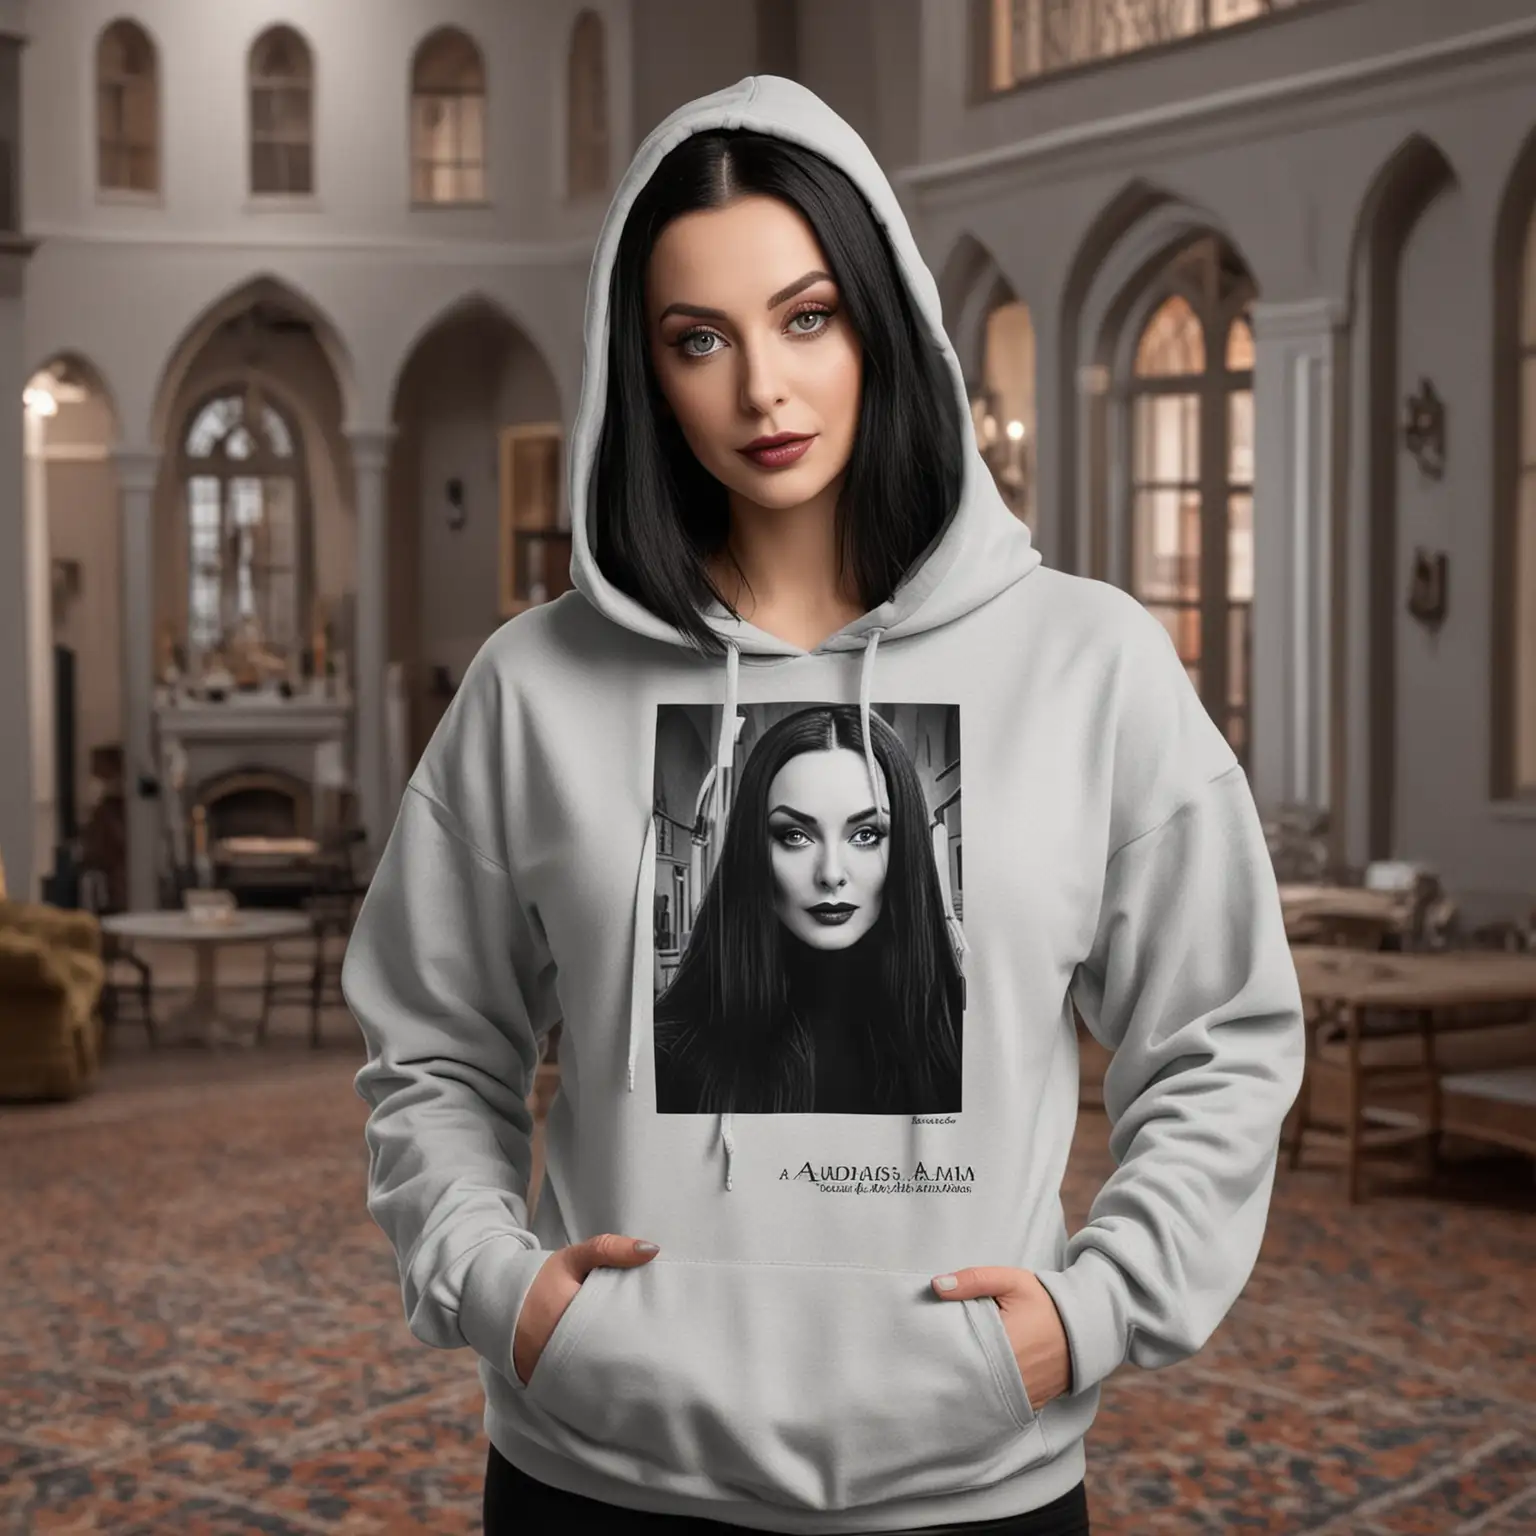 Gothic Style Woman Wearing Grey Hoodie in Addams Family Inspired Setting